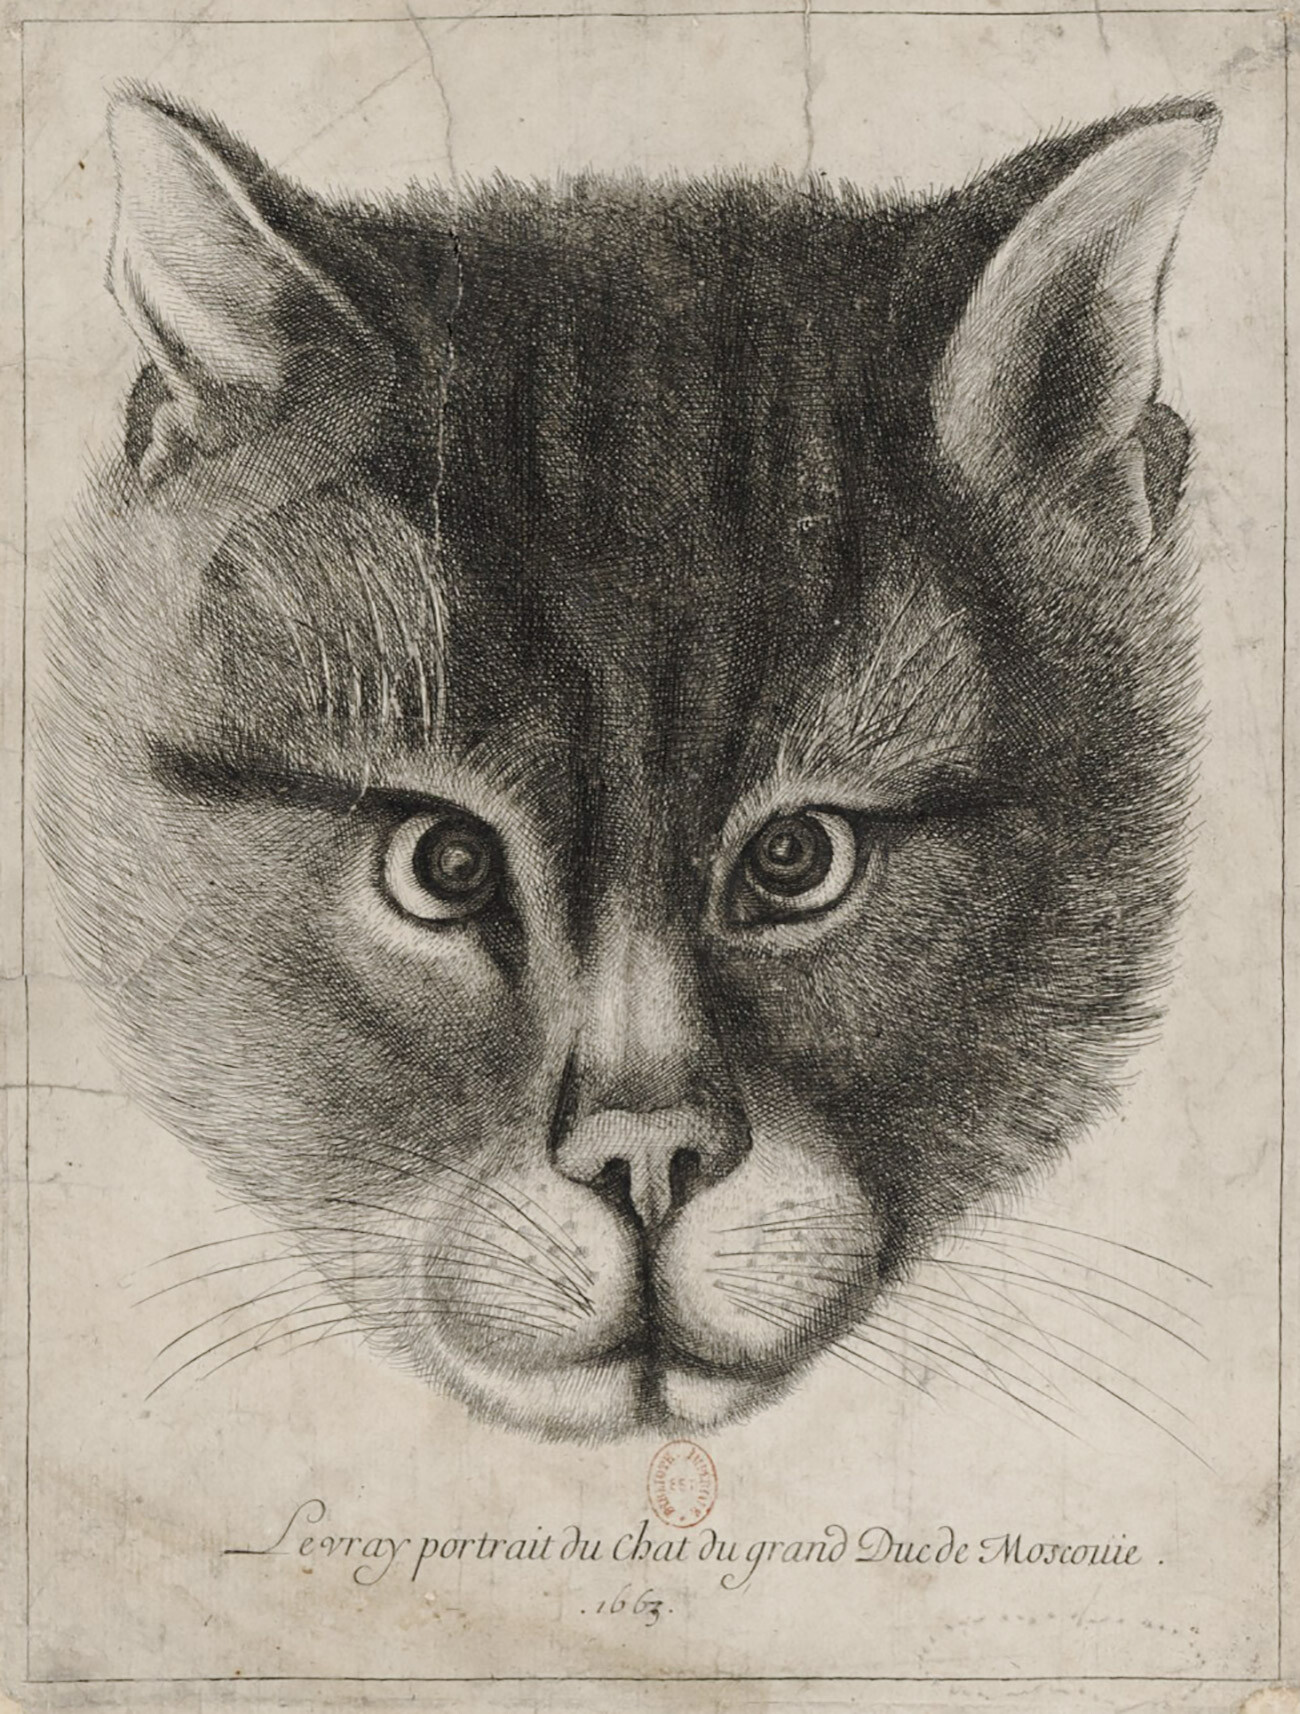 Vaclav Hollar. The Image of the Cat of the Grand Prince of Moscovia